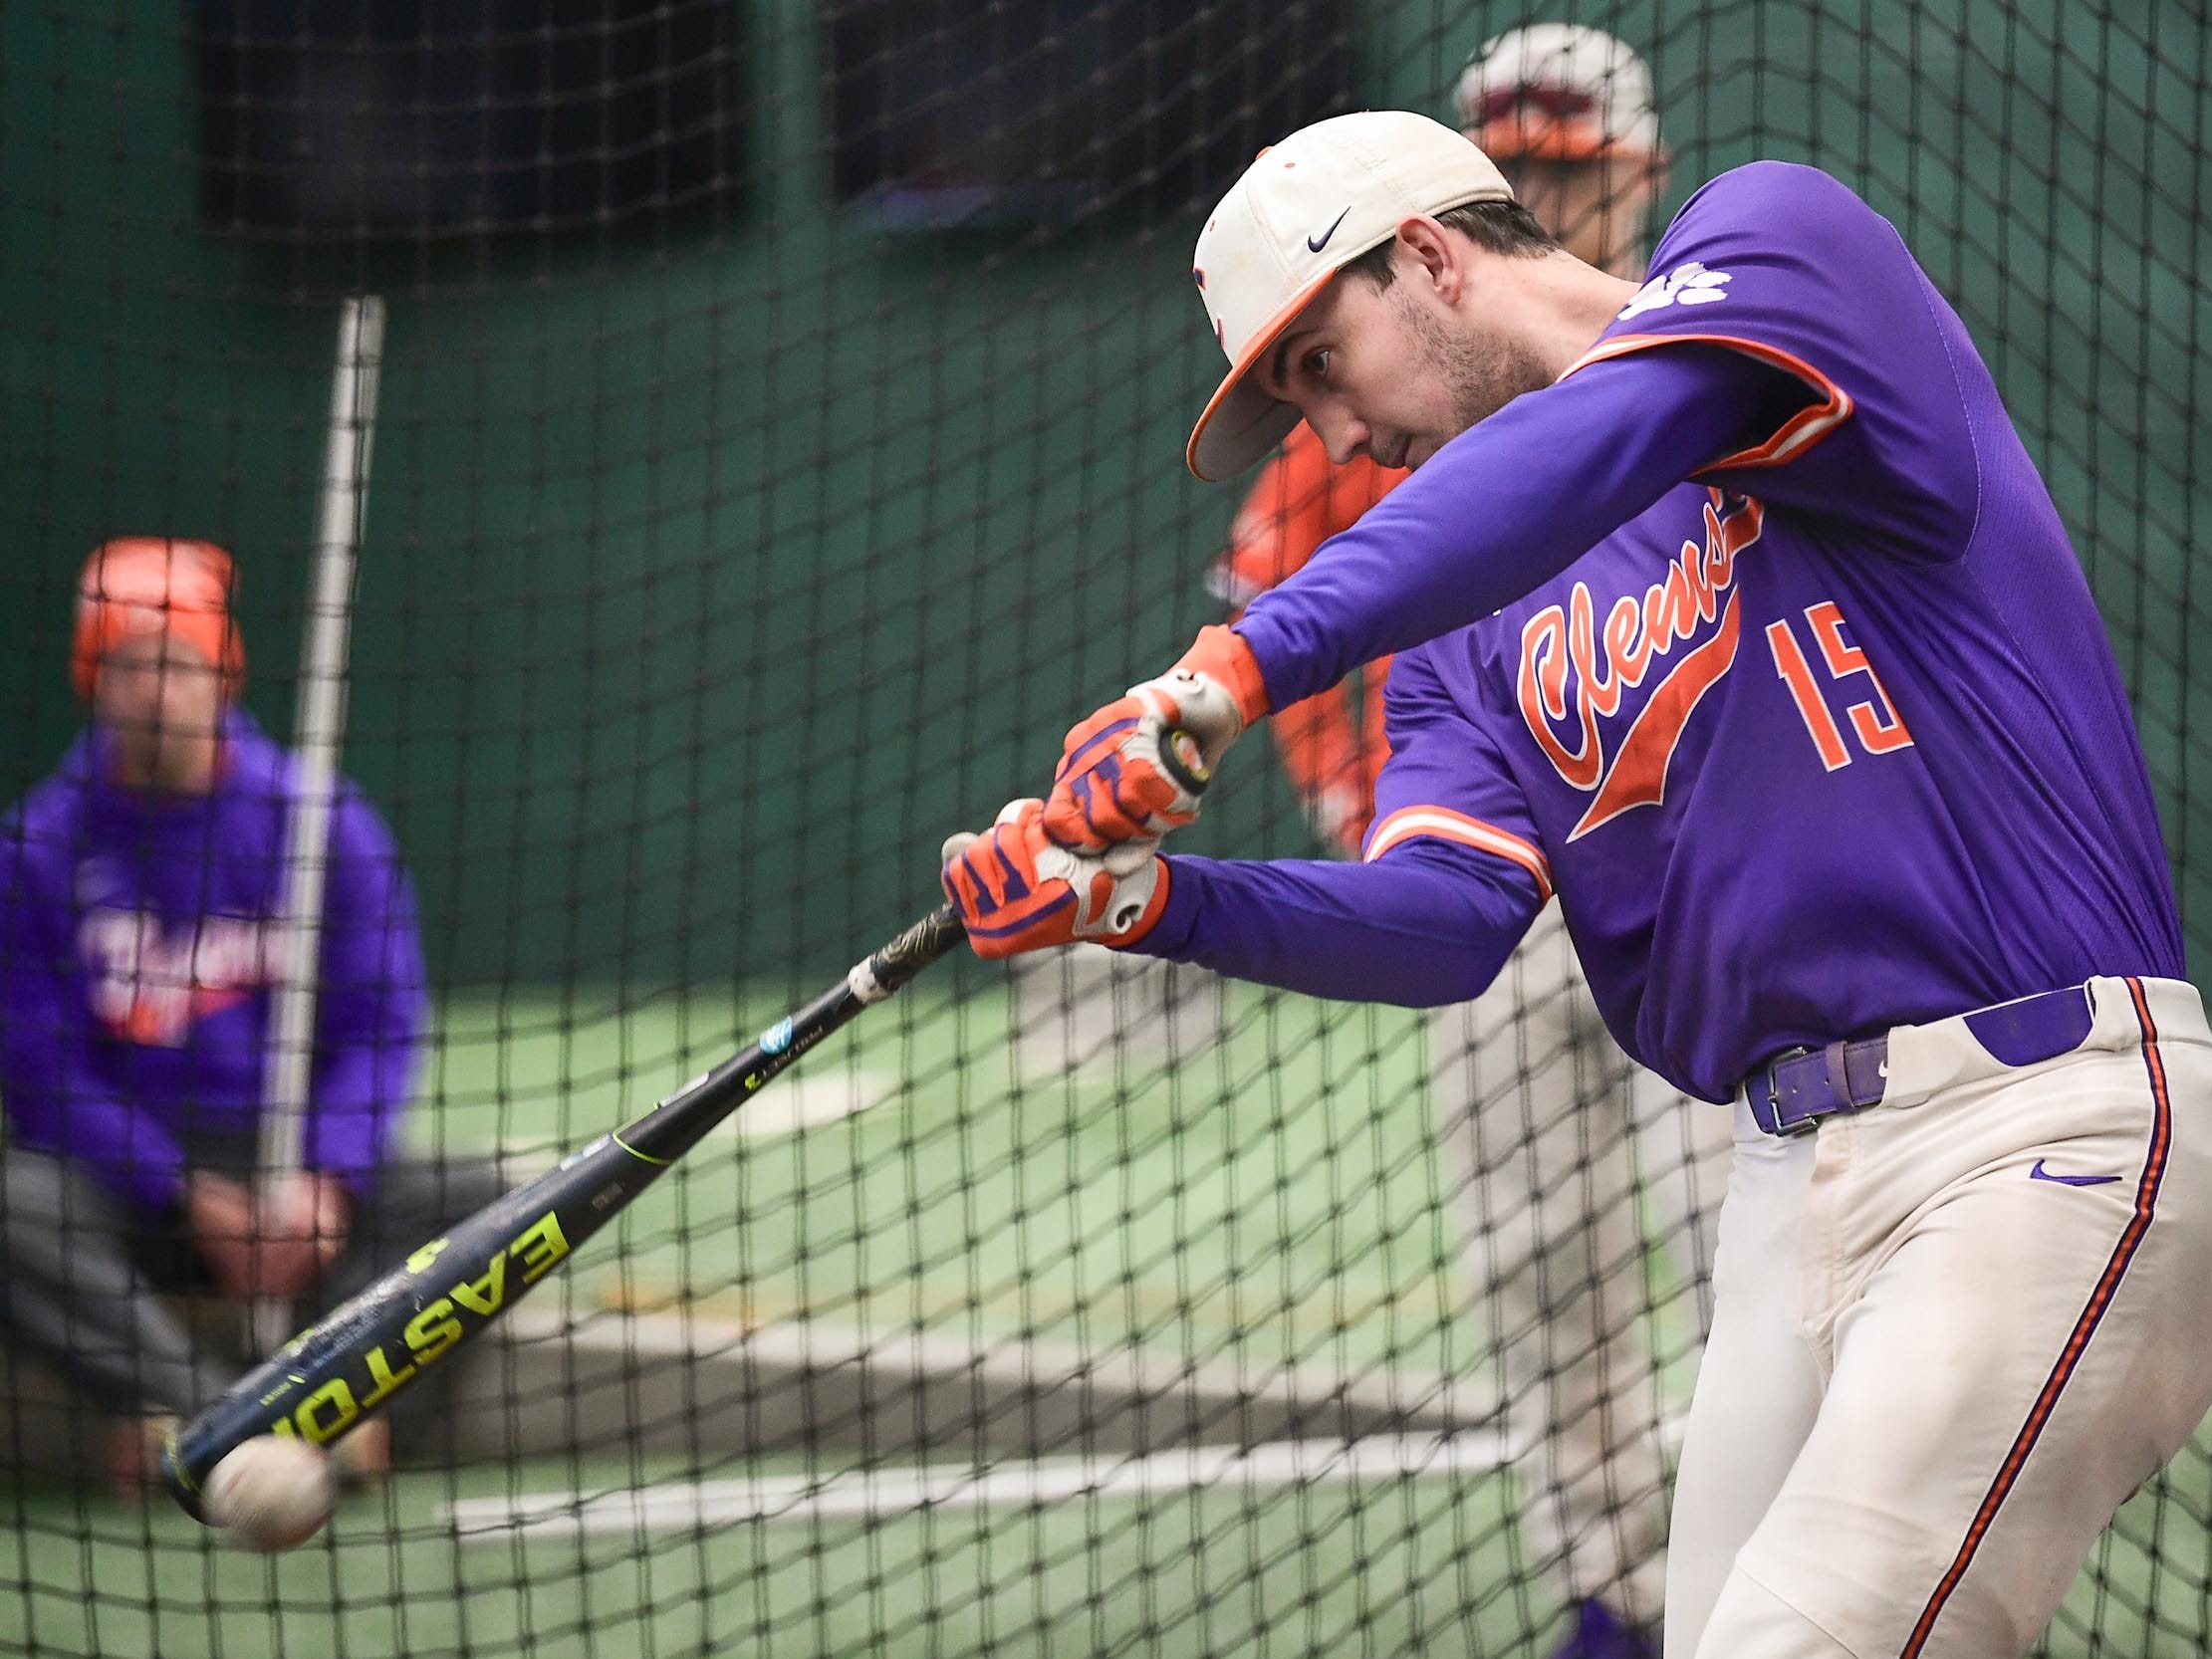 Clemson sophomore James Parker (15), former T.L. Hanna High standout, during batting practice at the first official team Spring practice at Doug Kingsmore Stadium in Clemson Friday, January 24, 2020.